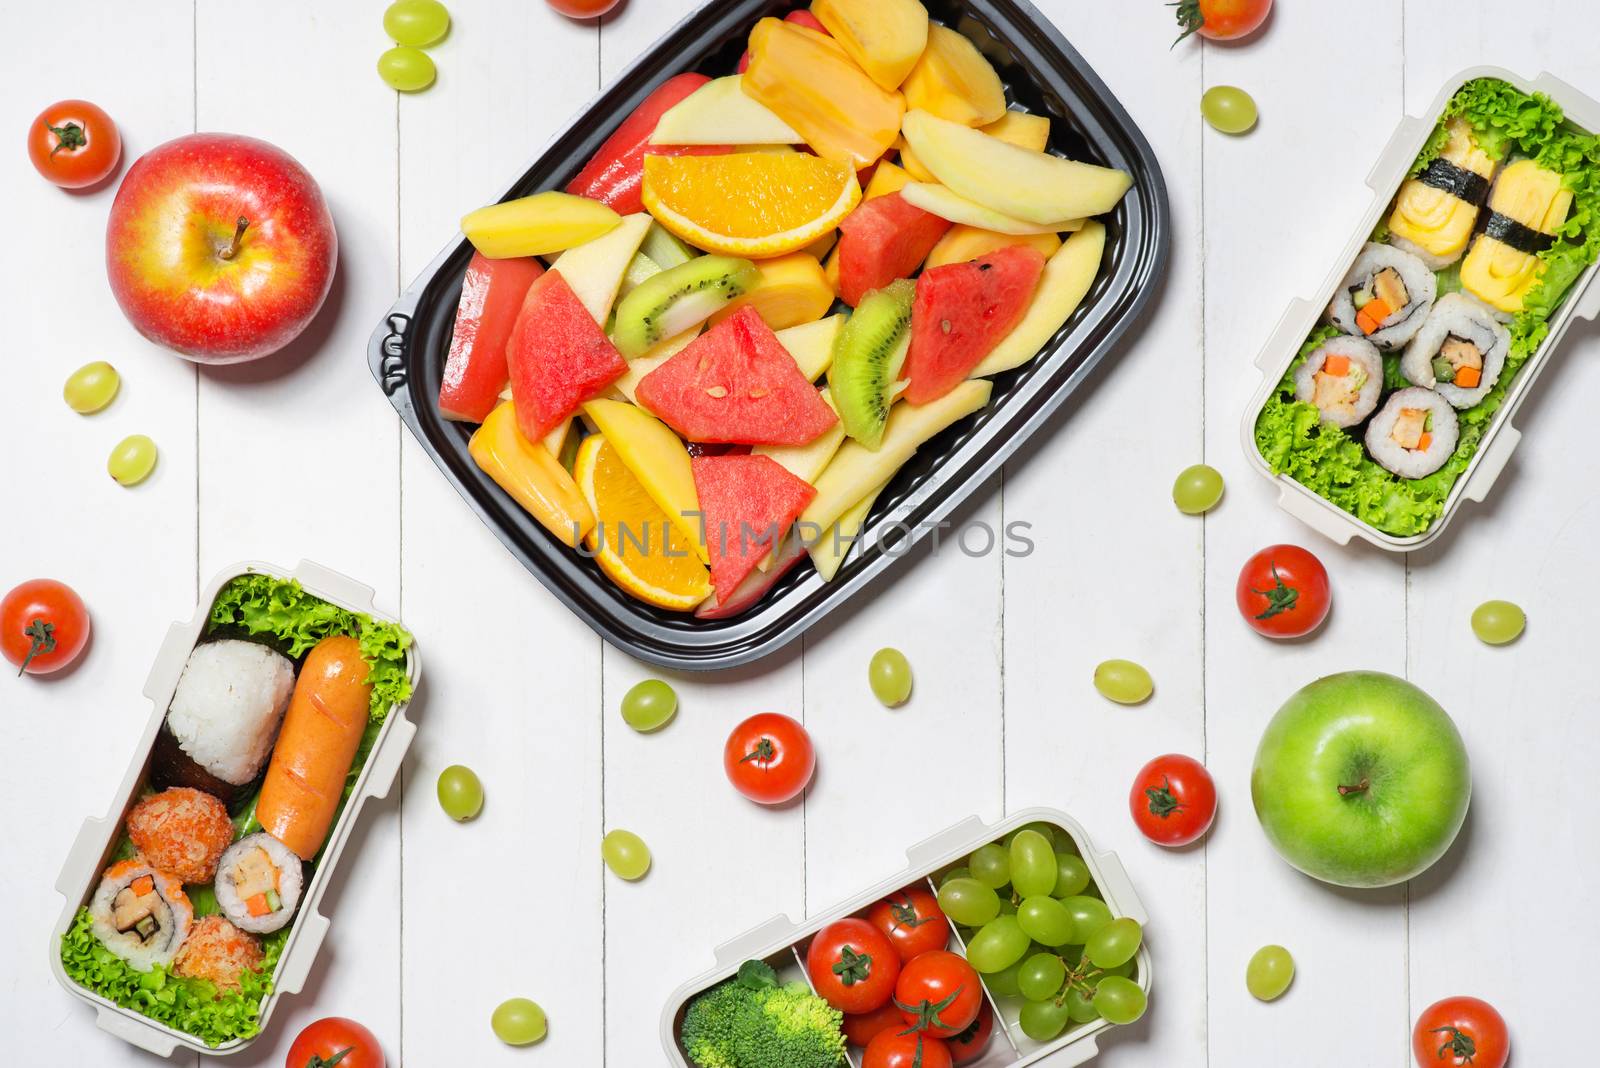 Healthy food concept. Bento box with food, fresh veggies and fruits.